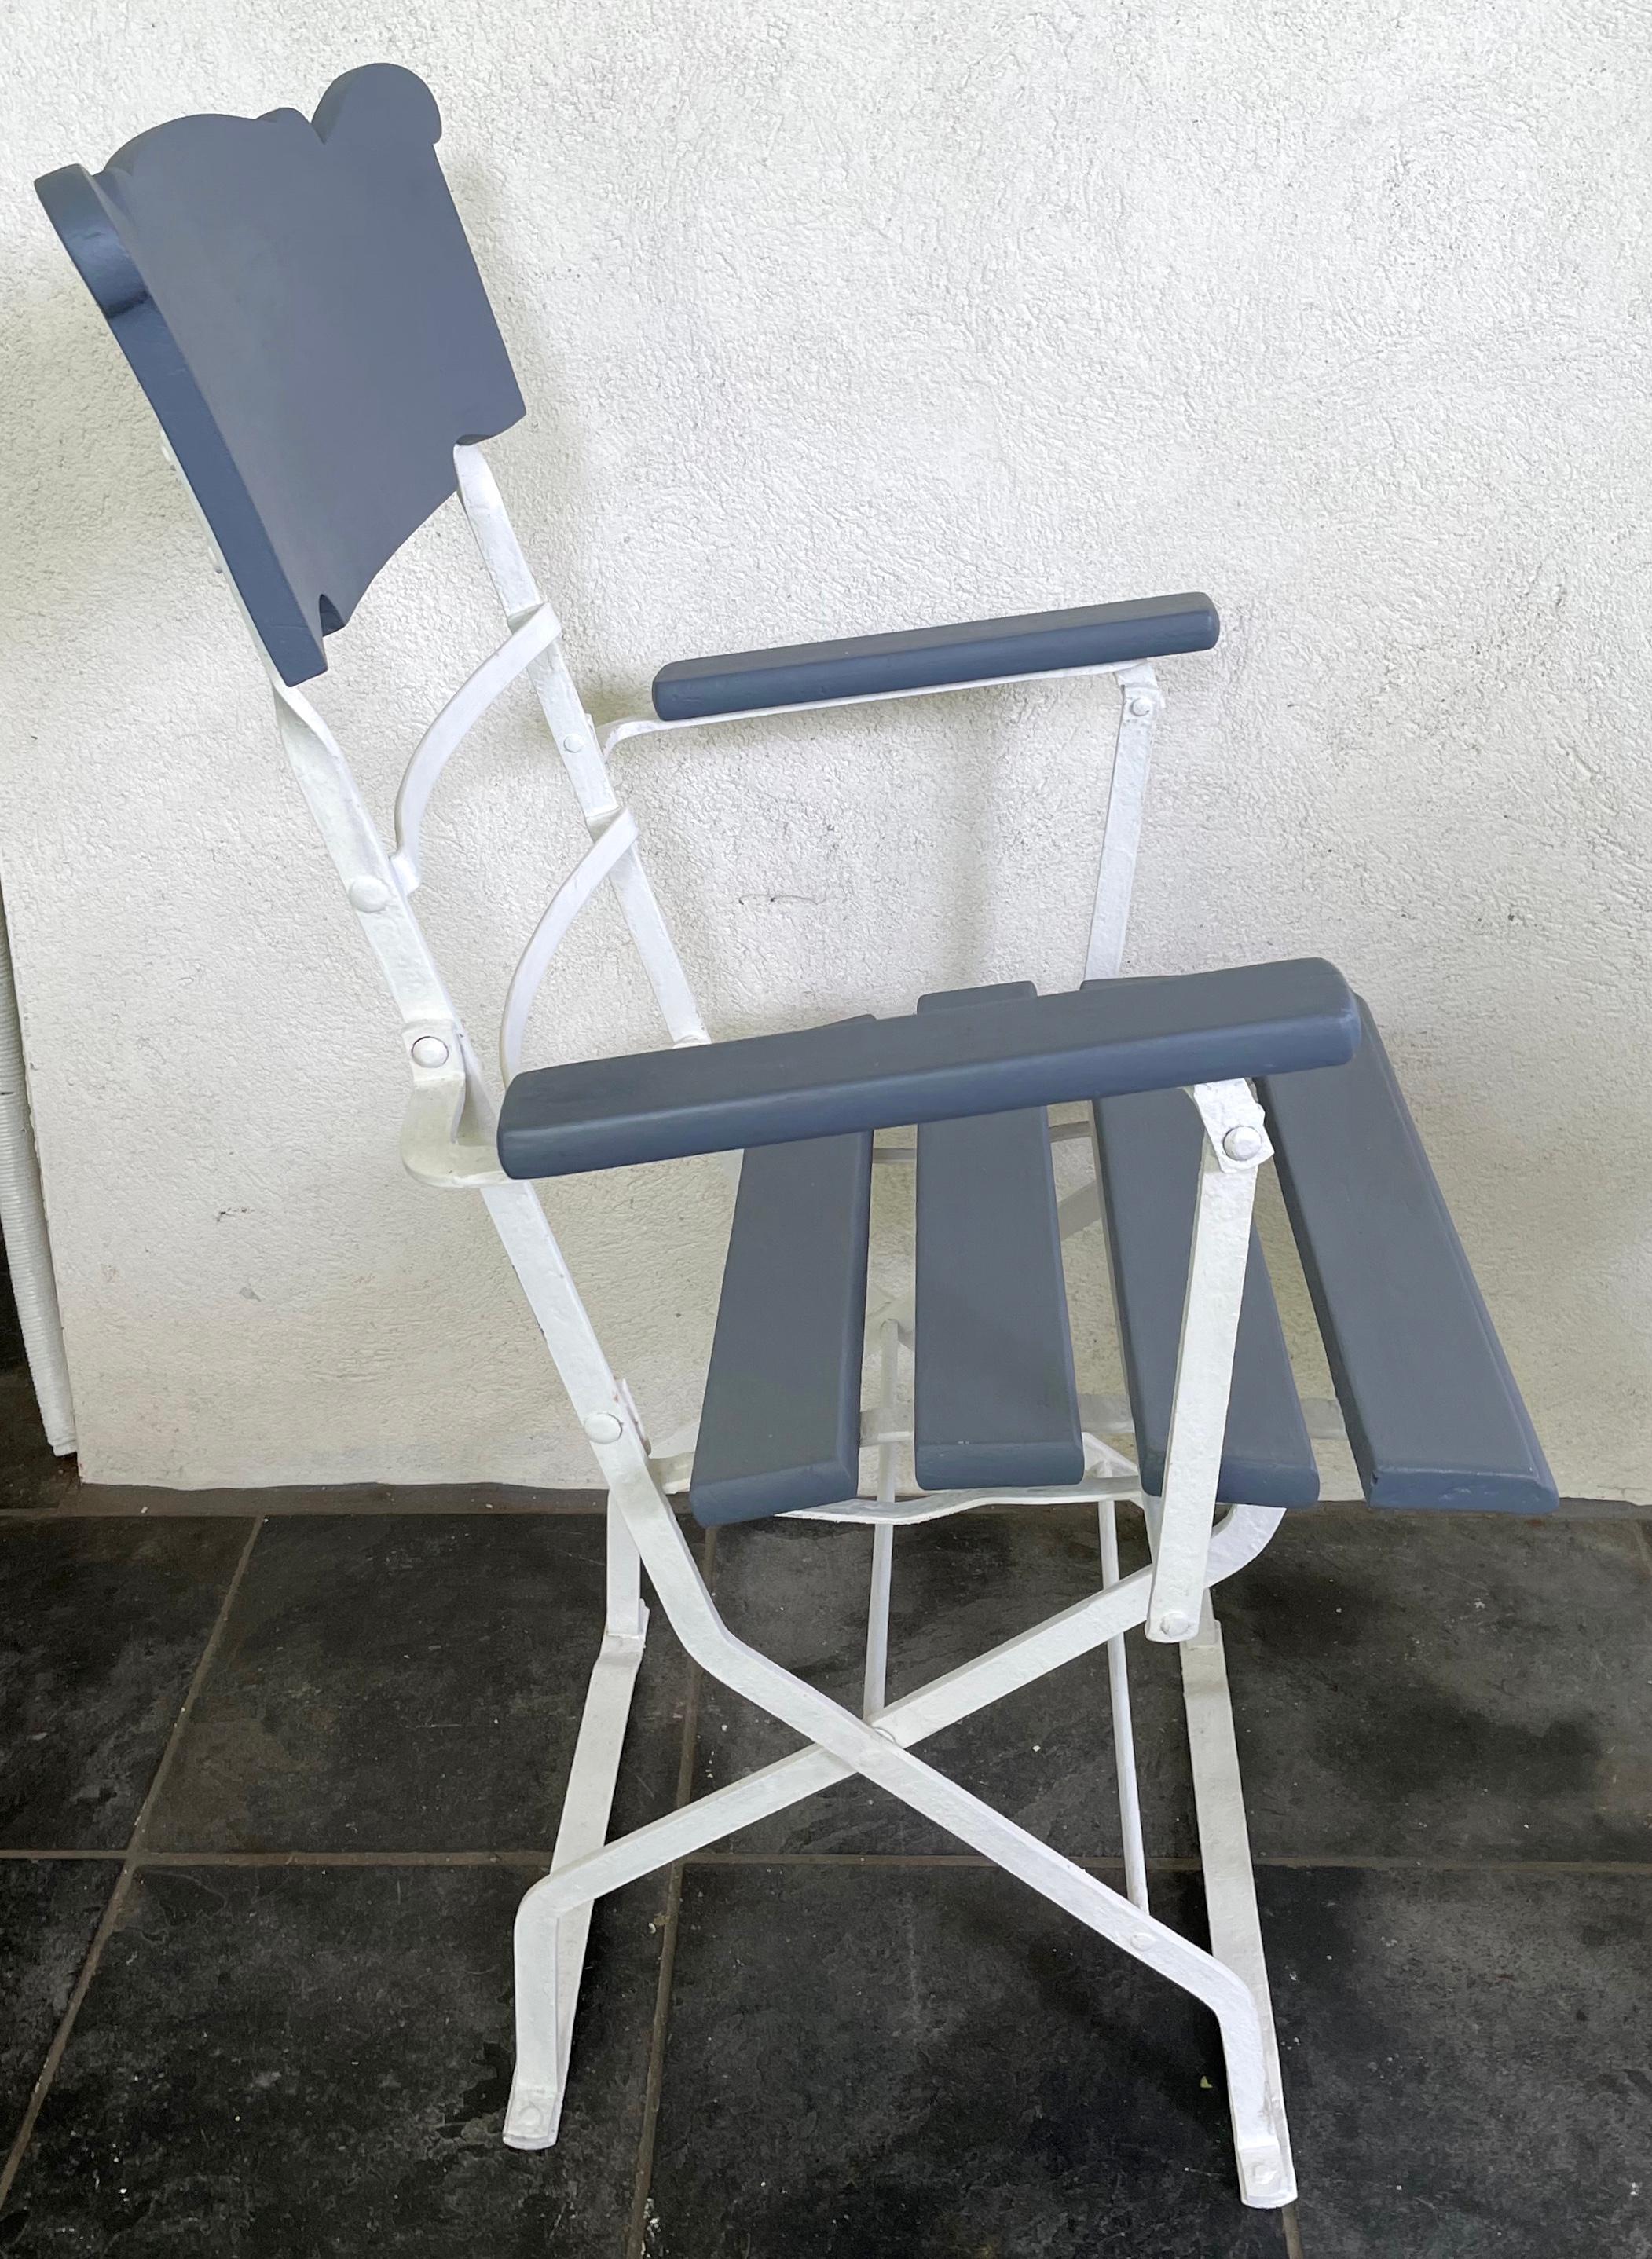 Grey and white Italian folding deck bistro chair. Vintage Italian foldable deck chair. White painted with grey wood slats with adjustable armrest. Italy 1930’s
Dimensions: 21